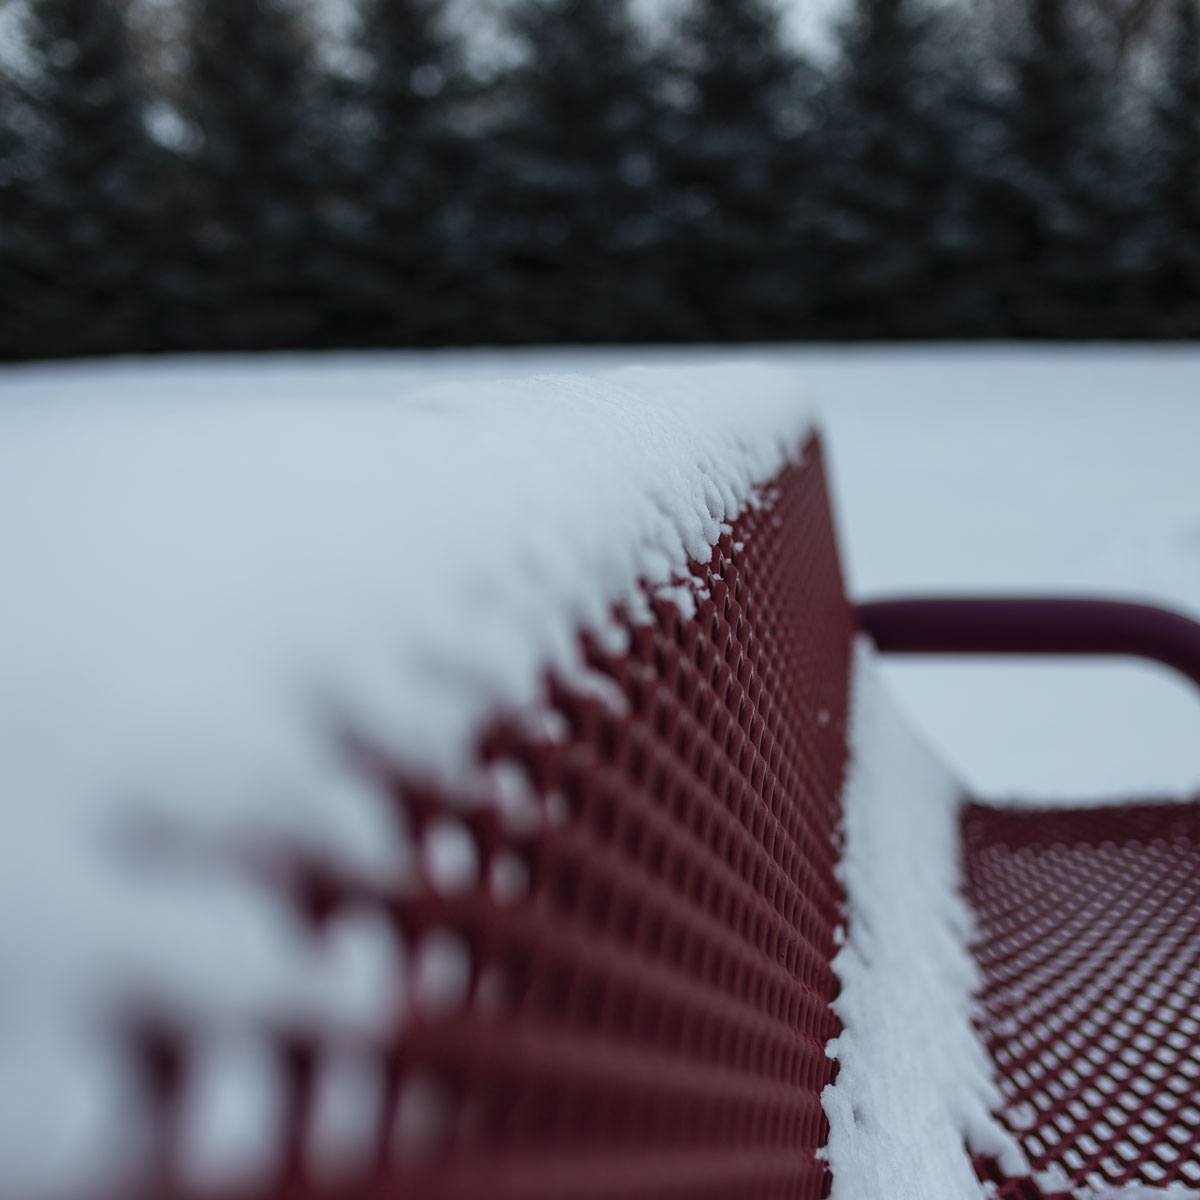 A snow covered park bench is almost completely blurred using a shallow depth-of-field except for the focus point halfway through the image.